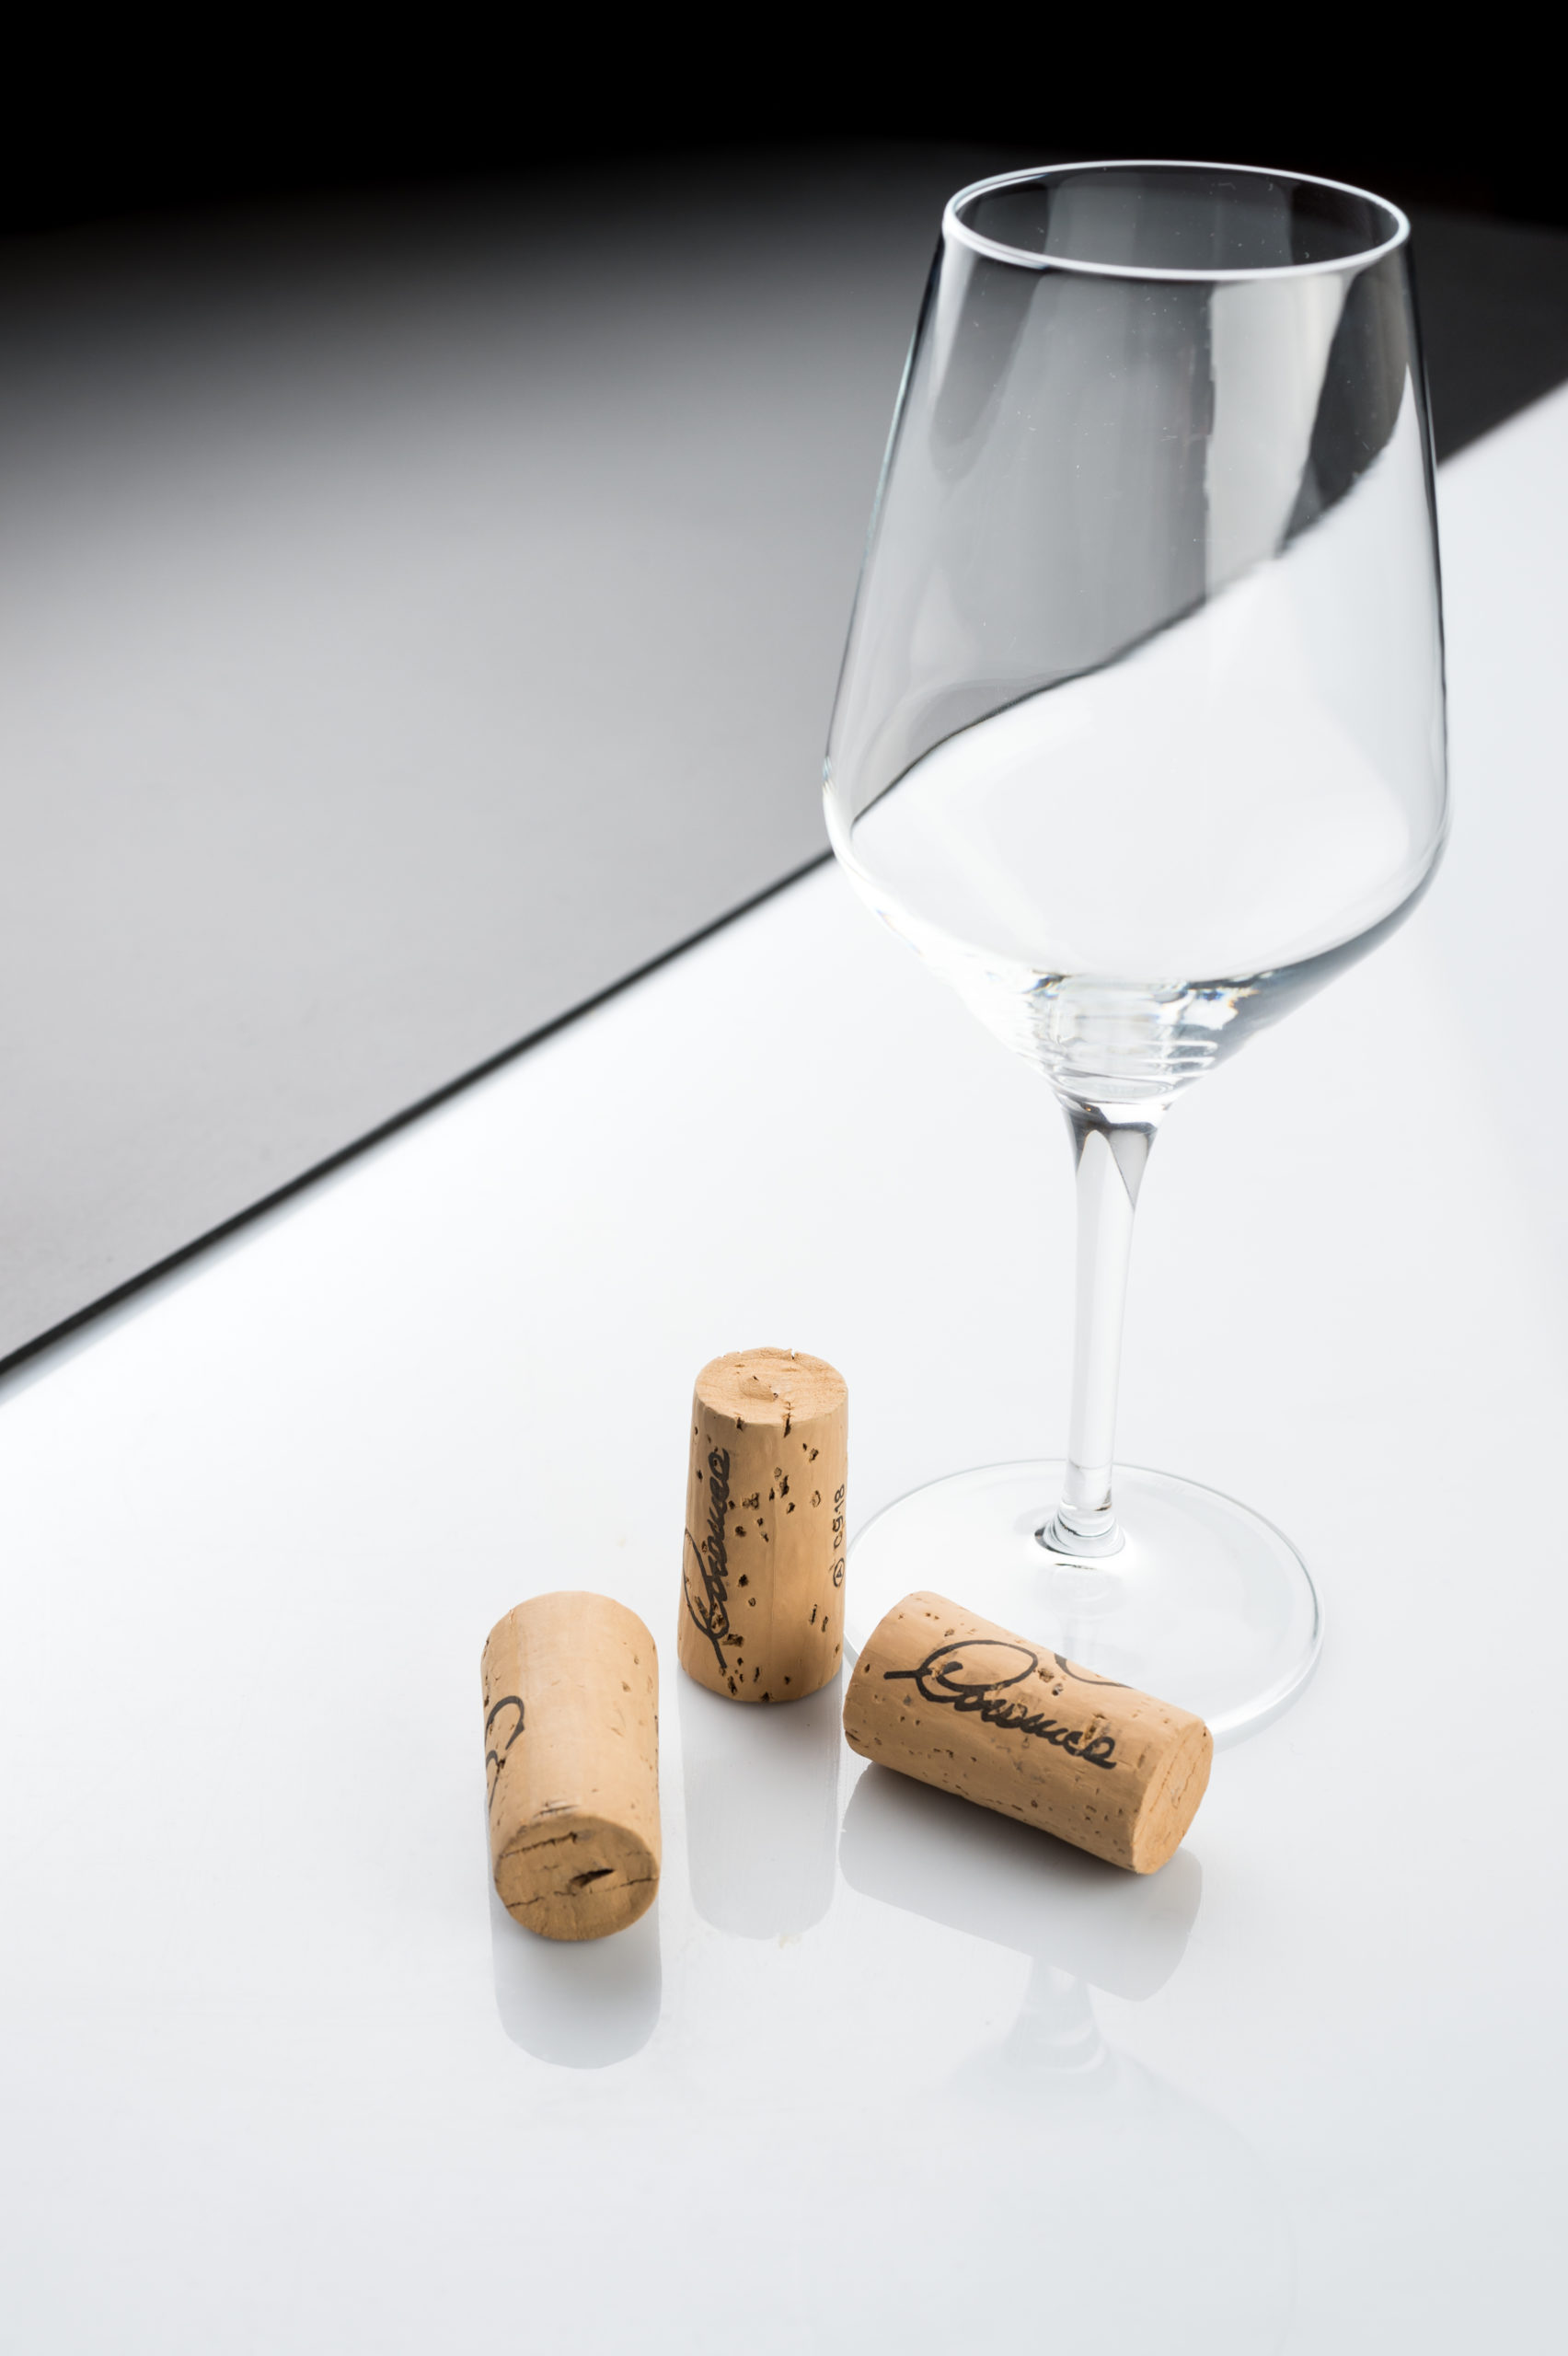 hren | plethora of creativity // Coronica winery product photography at Rivica restaurant